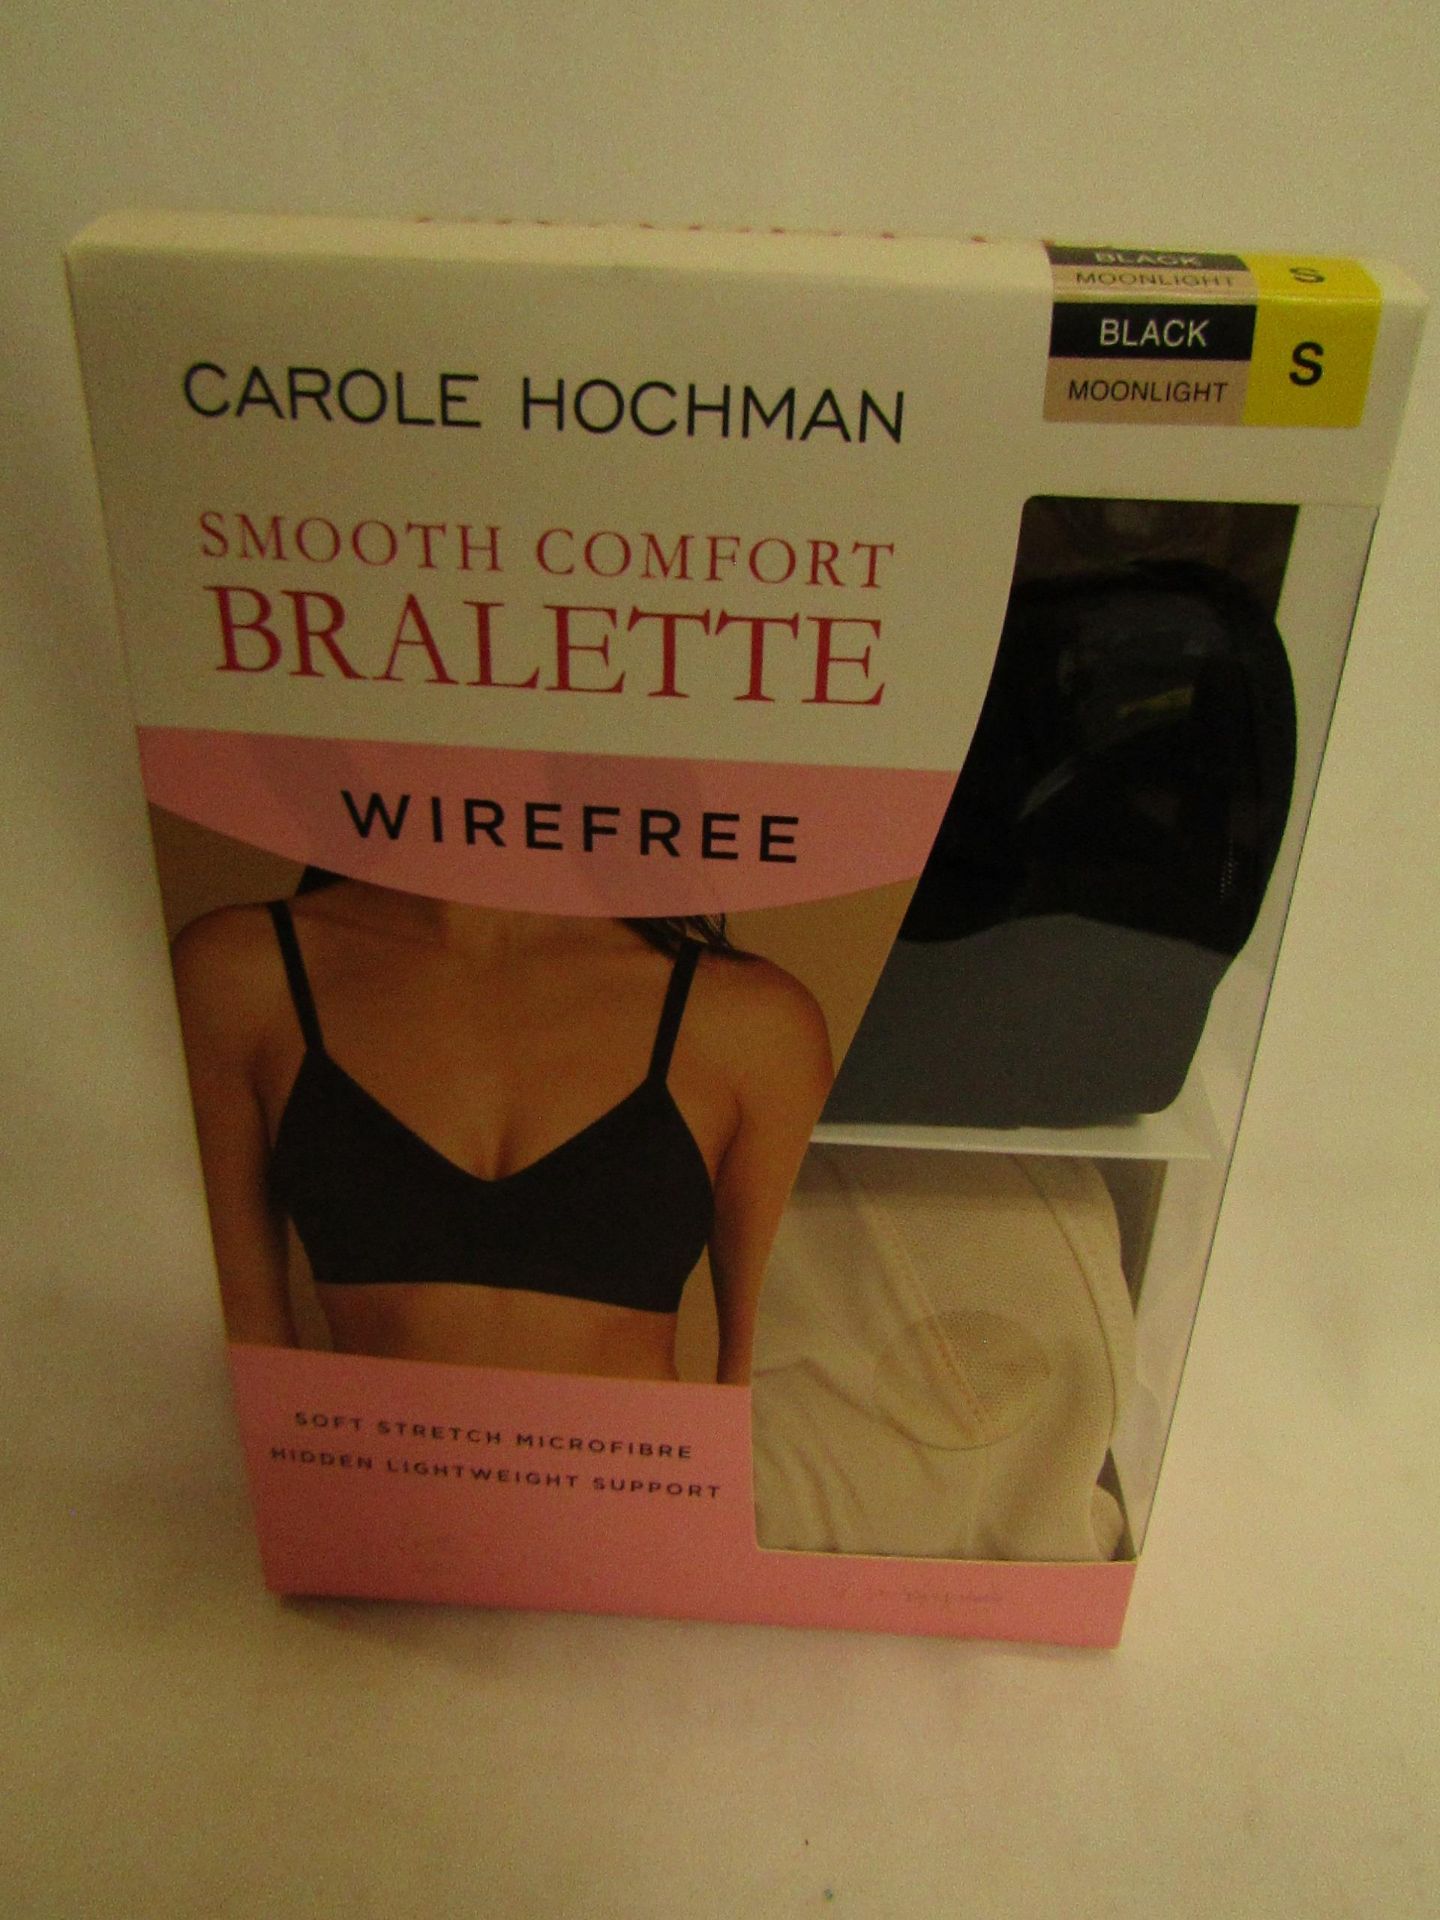 1 X PK of 2 Carole Hochman Wirefree Bralette Size S New & Boxed (Picked at Randon So Colours Will